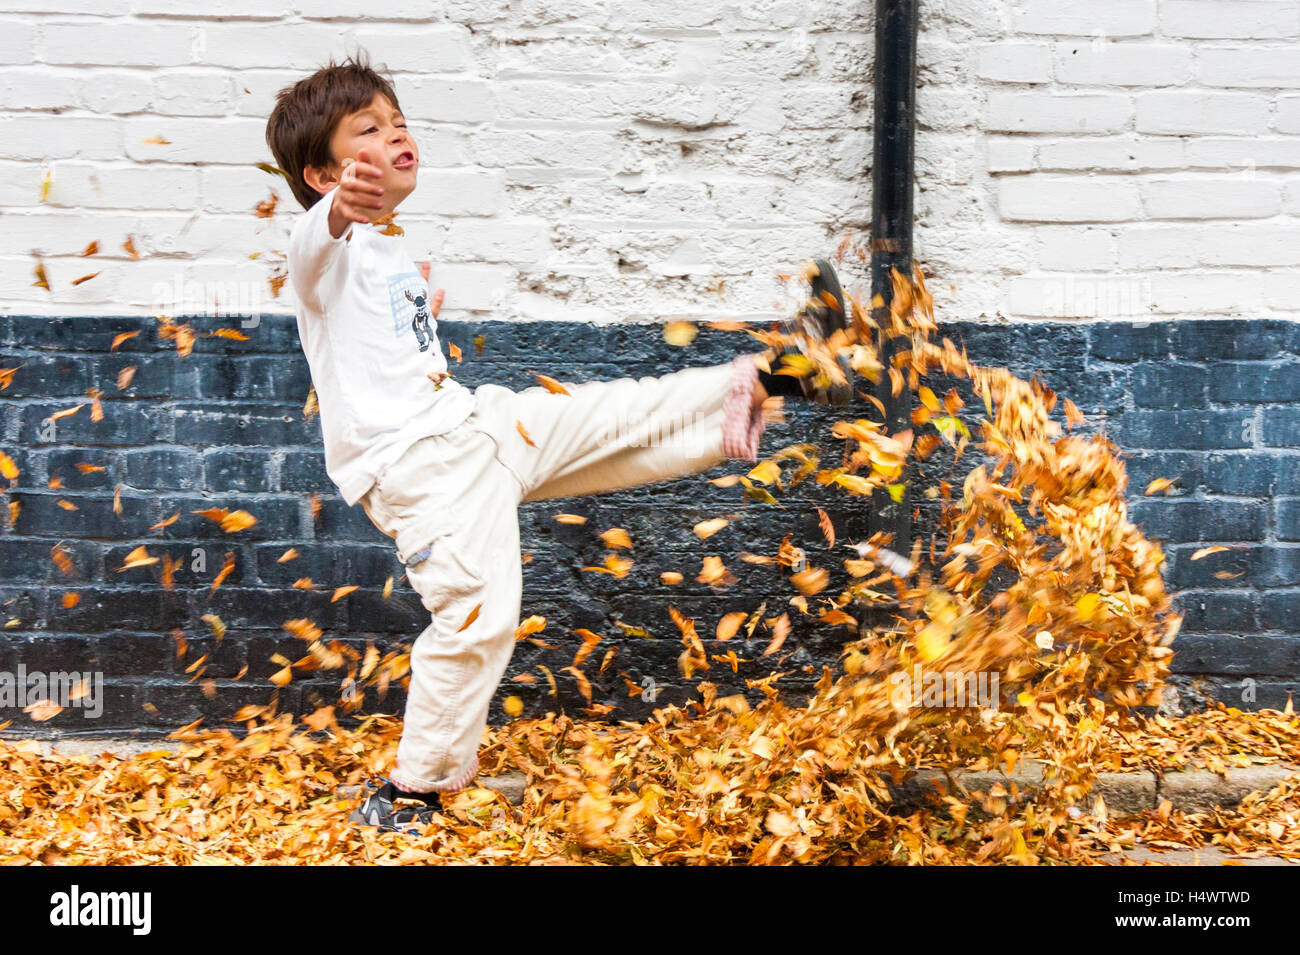 Caucasian child, boy, seven years old, kicking brown autumn leaves in street by white wall. Side view. Stock Photo